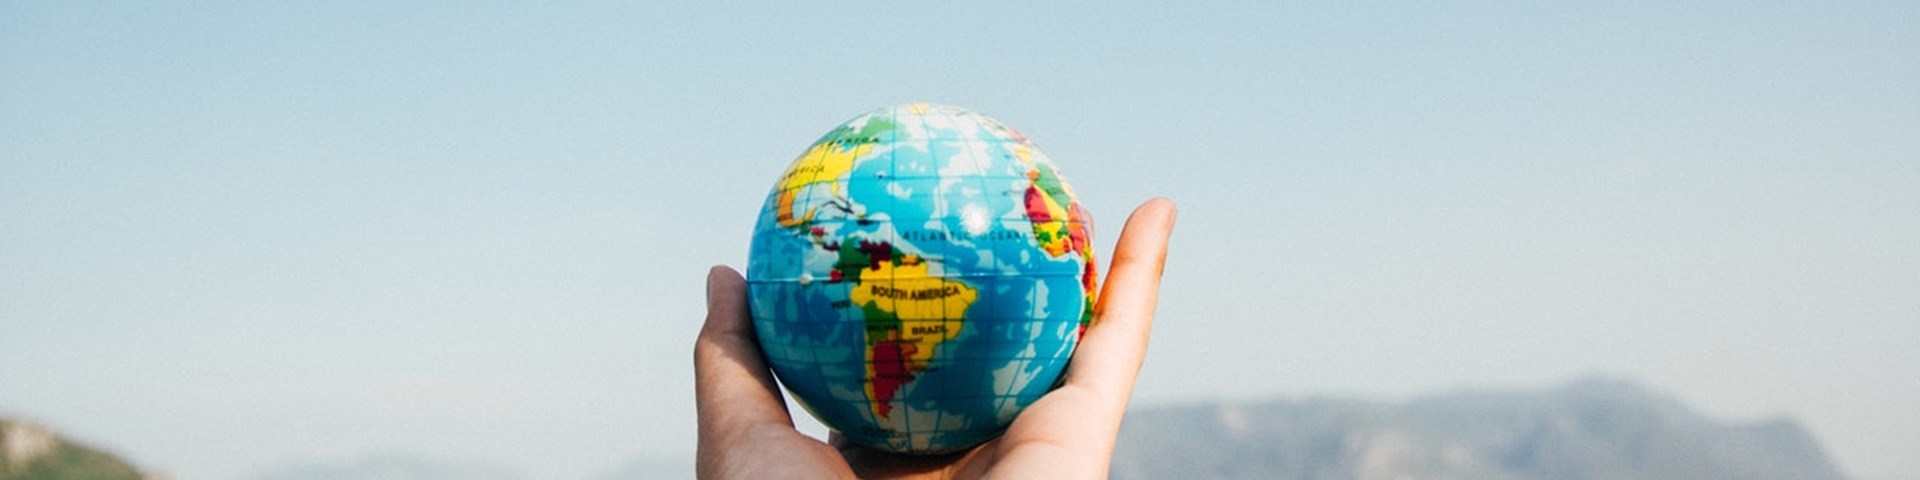 Traveller holding small globe, covered by travel insurance 